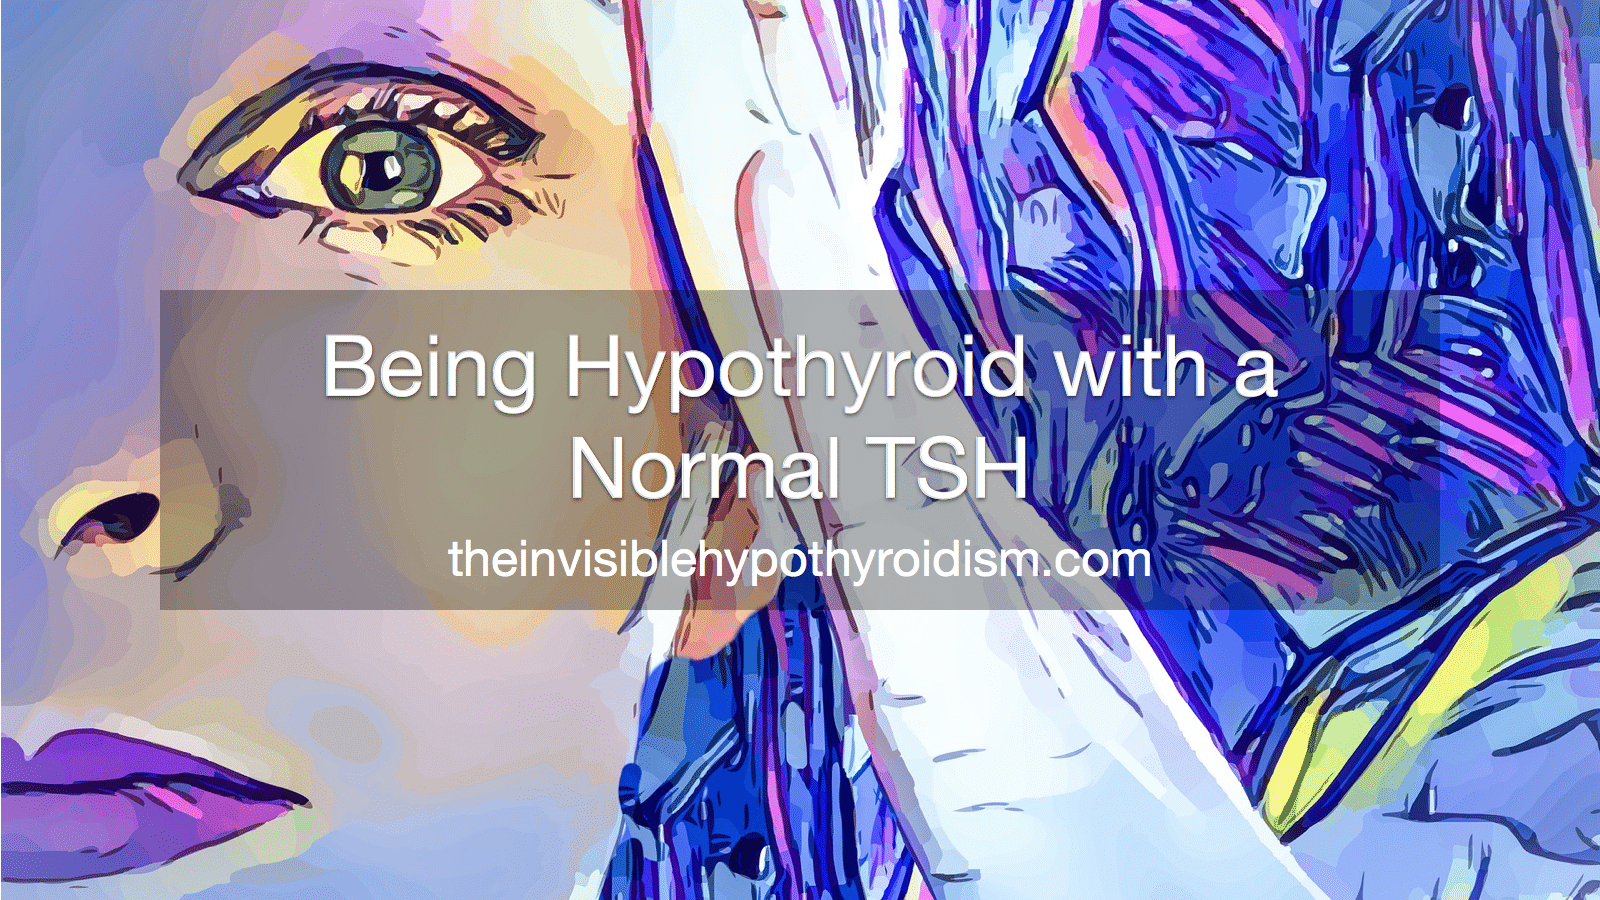 Being Hypothyroid with a Normal TSH